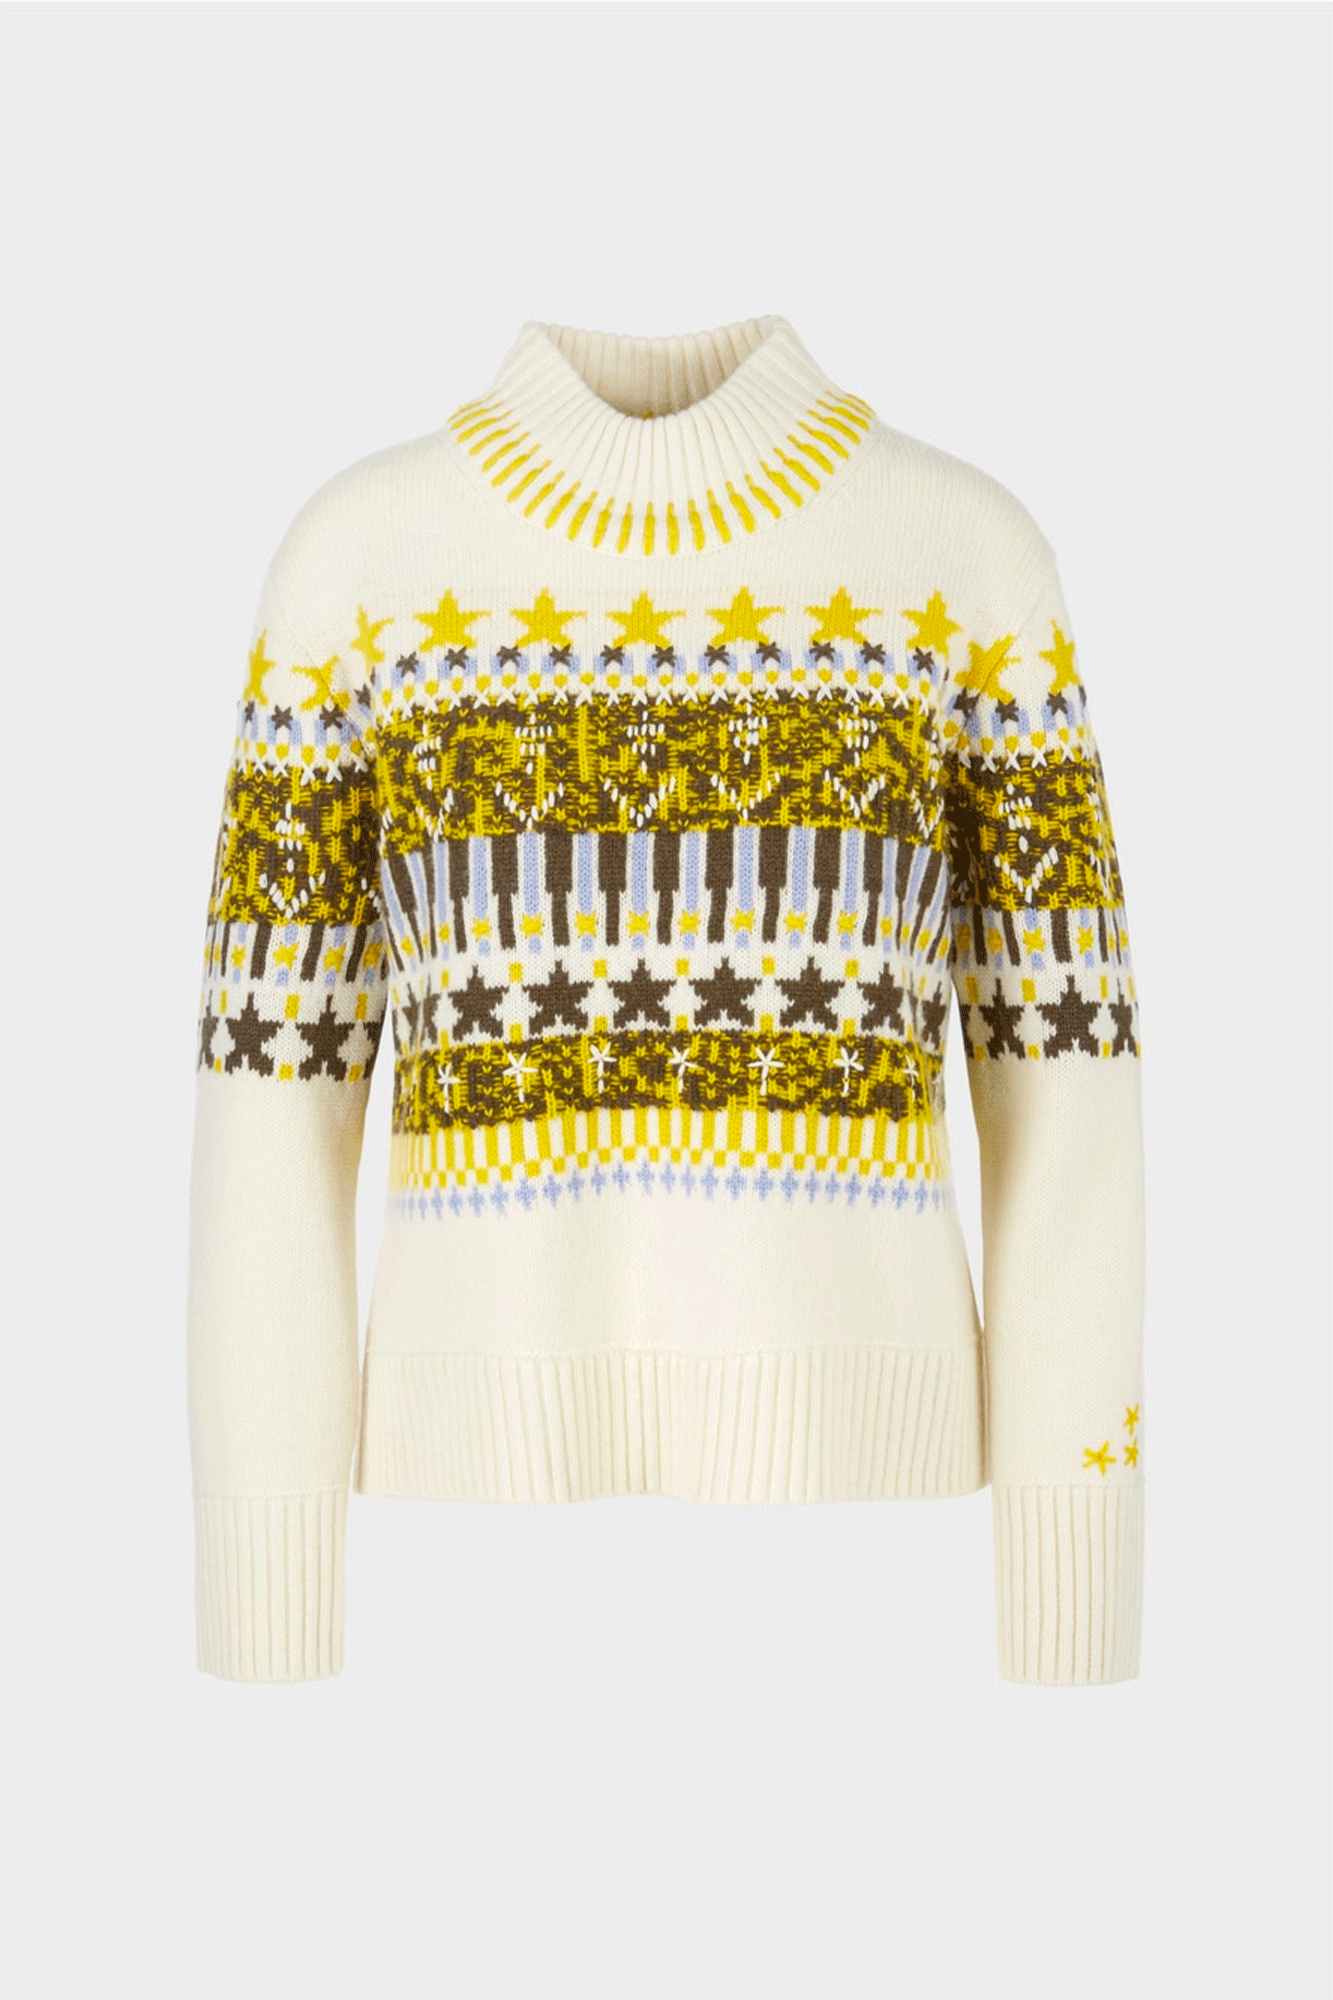 This Snaky Stars Sweater from Marc Cain is crafted with sophistication and care, featuring stars embroidered and knitted into the pattern. Its relaxed fit is highlighted by wide ribbed cuffs, while the two-tone round neckline adds a lovely touch. The wool and cashmere fabric blend from the sustainability label "Rethink Together" ensures warmth and soft comfort.